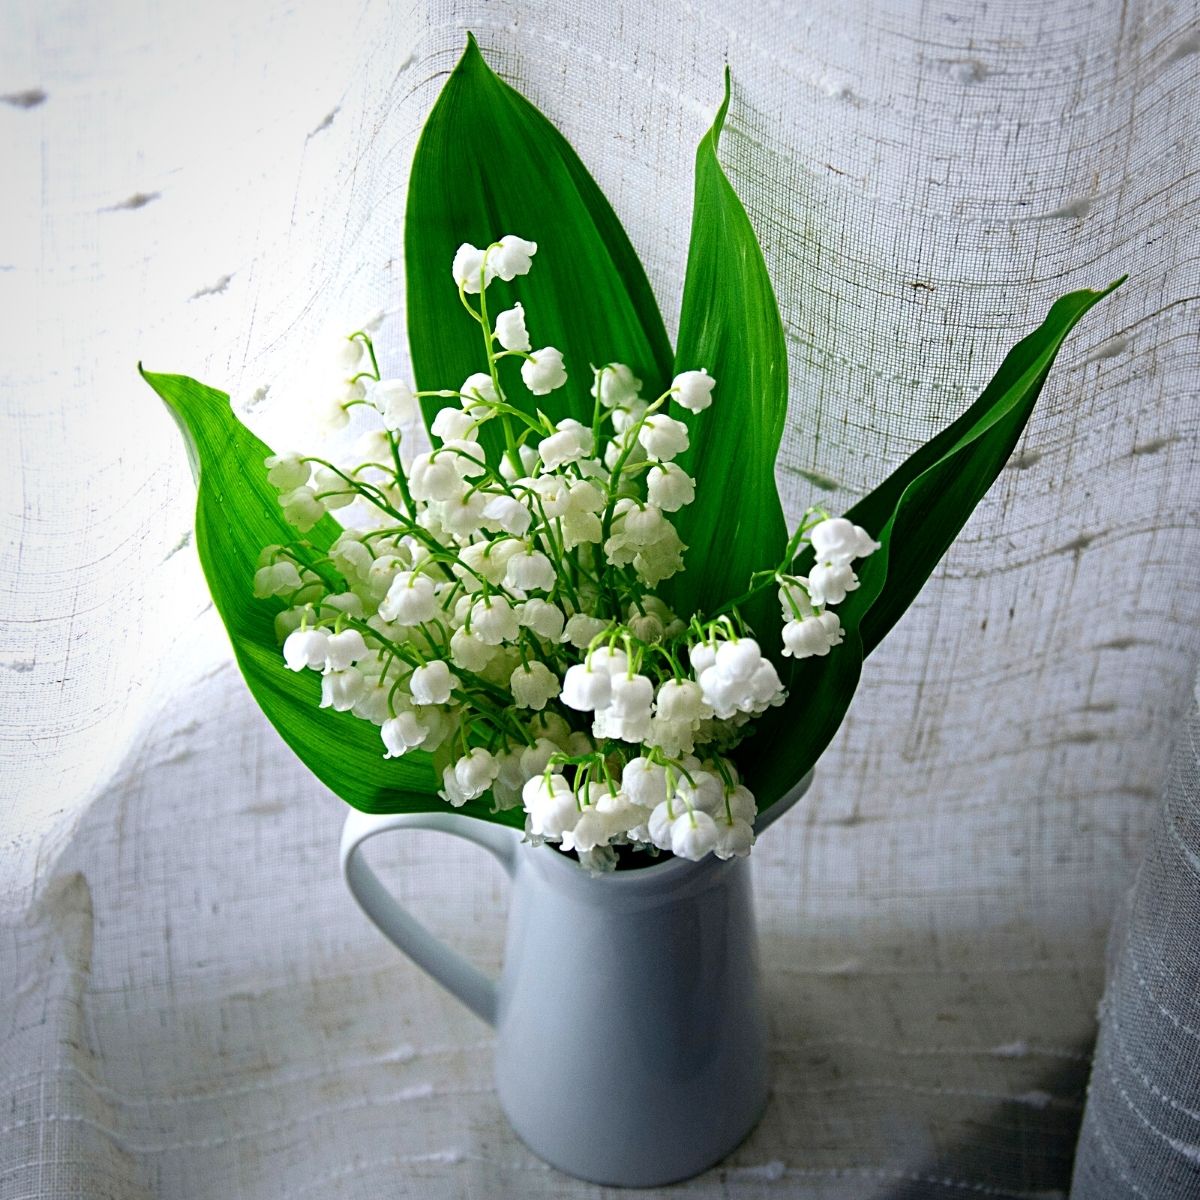 Potted lily of the valley flowers